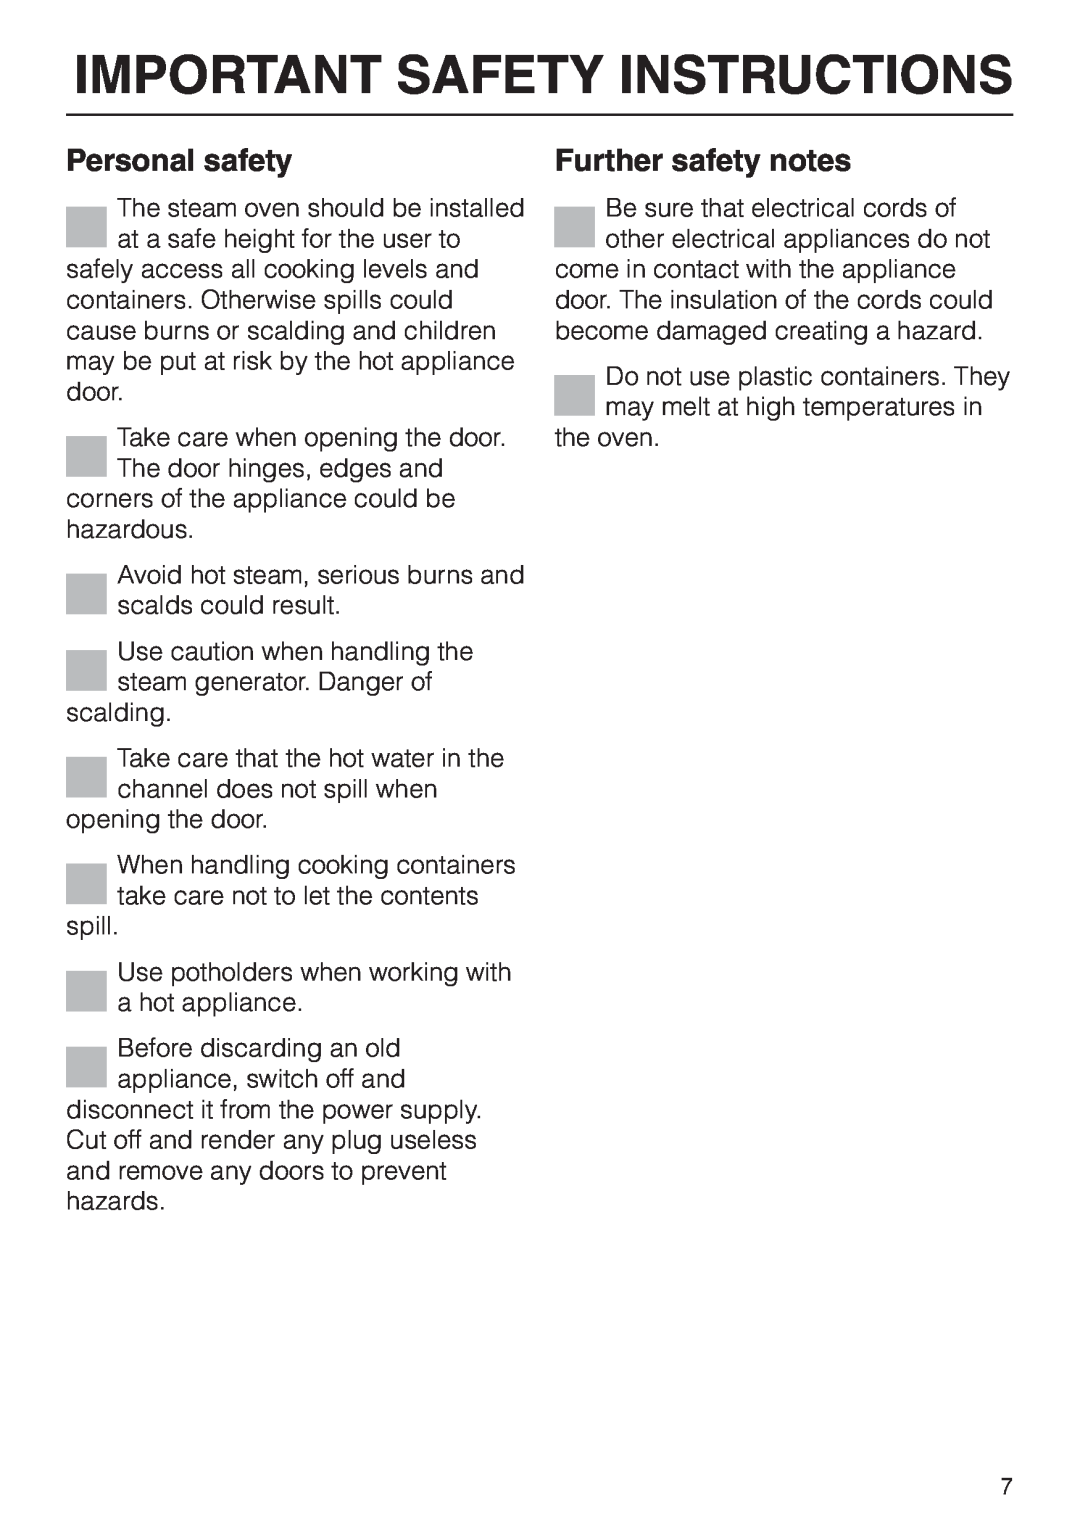 Miele DG 2661 installation instructions Personal safety, Further safety notes, Important Safety Instructions 